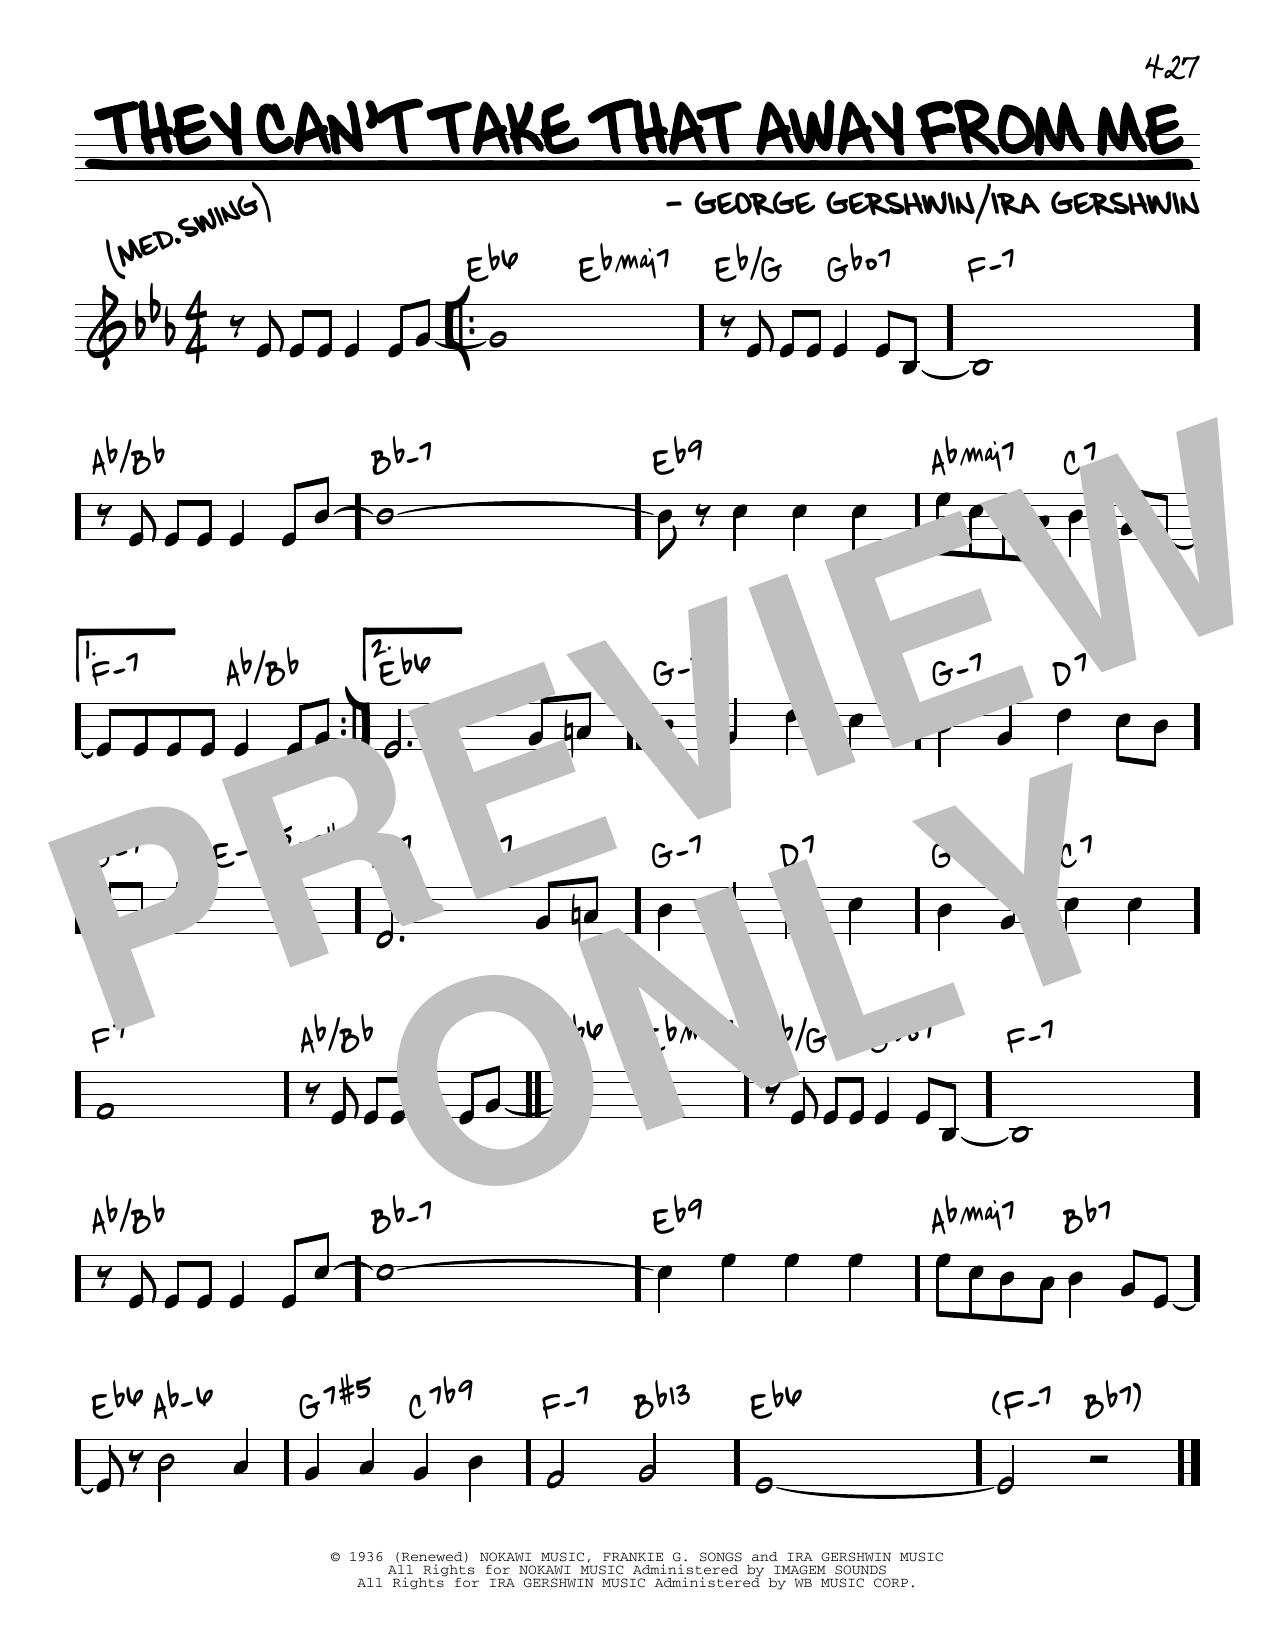 Download George Gershwin & Ira Gershwin They Can't Take That Away From Me Sheet Music